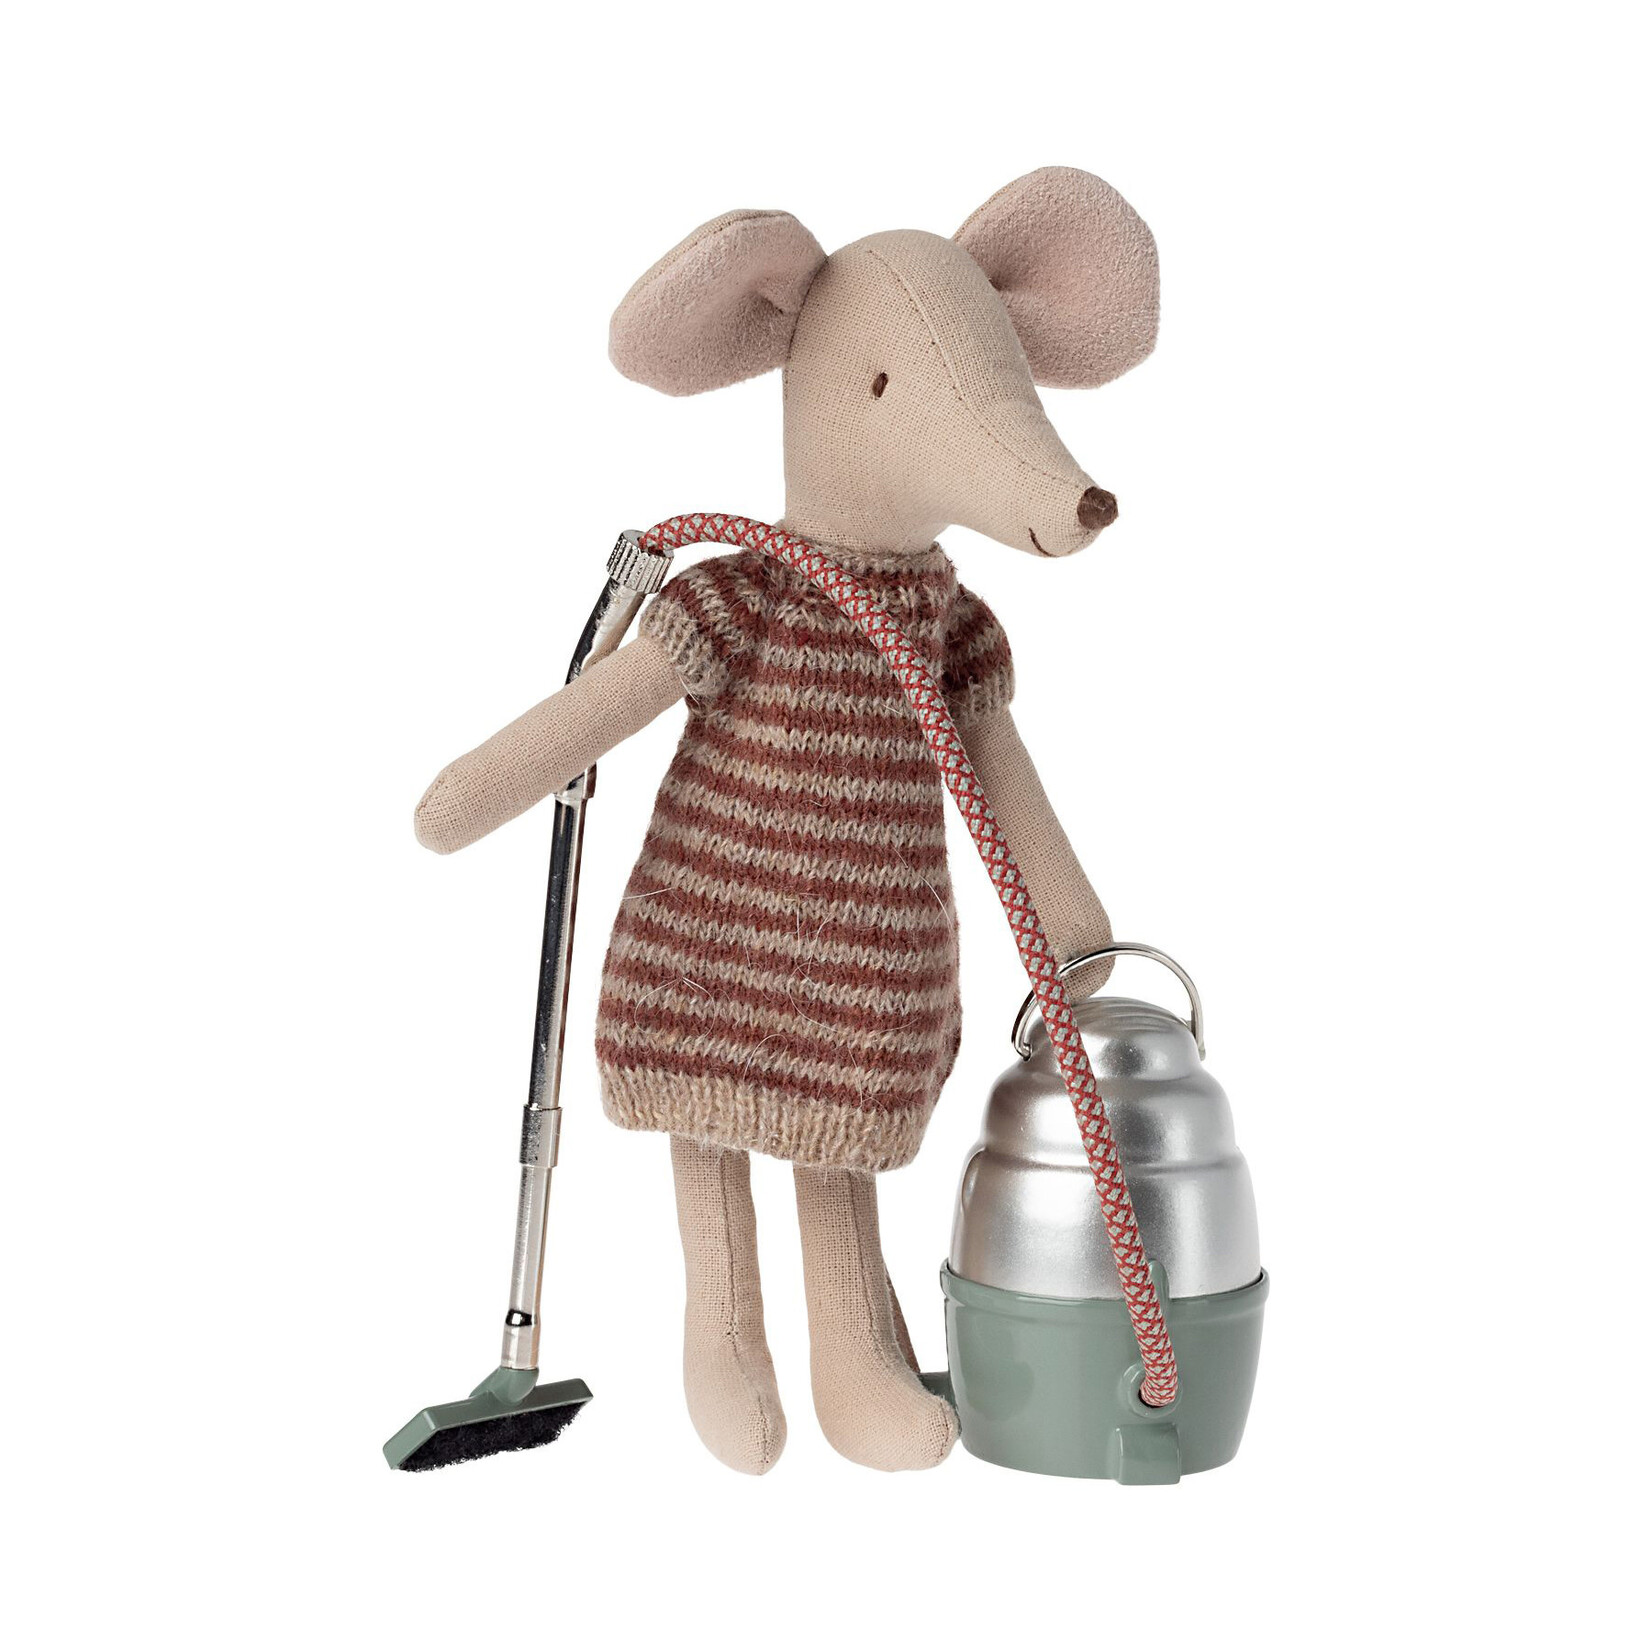 Maileg Maileg Vacuum cleaner Hoover Mouse